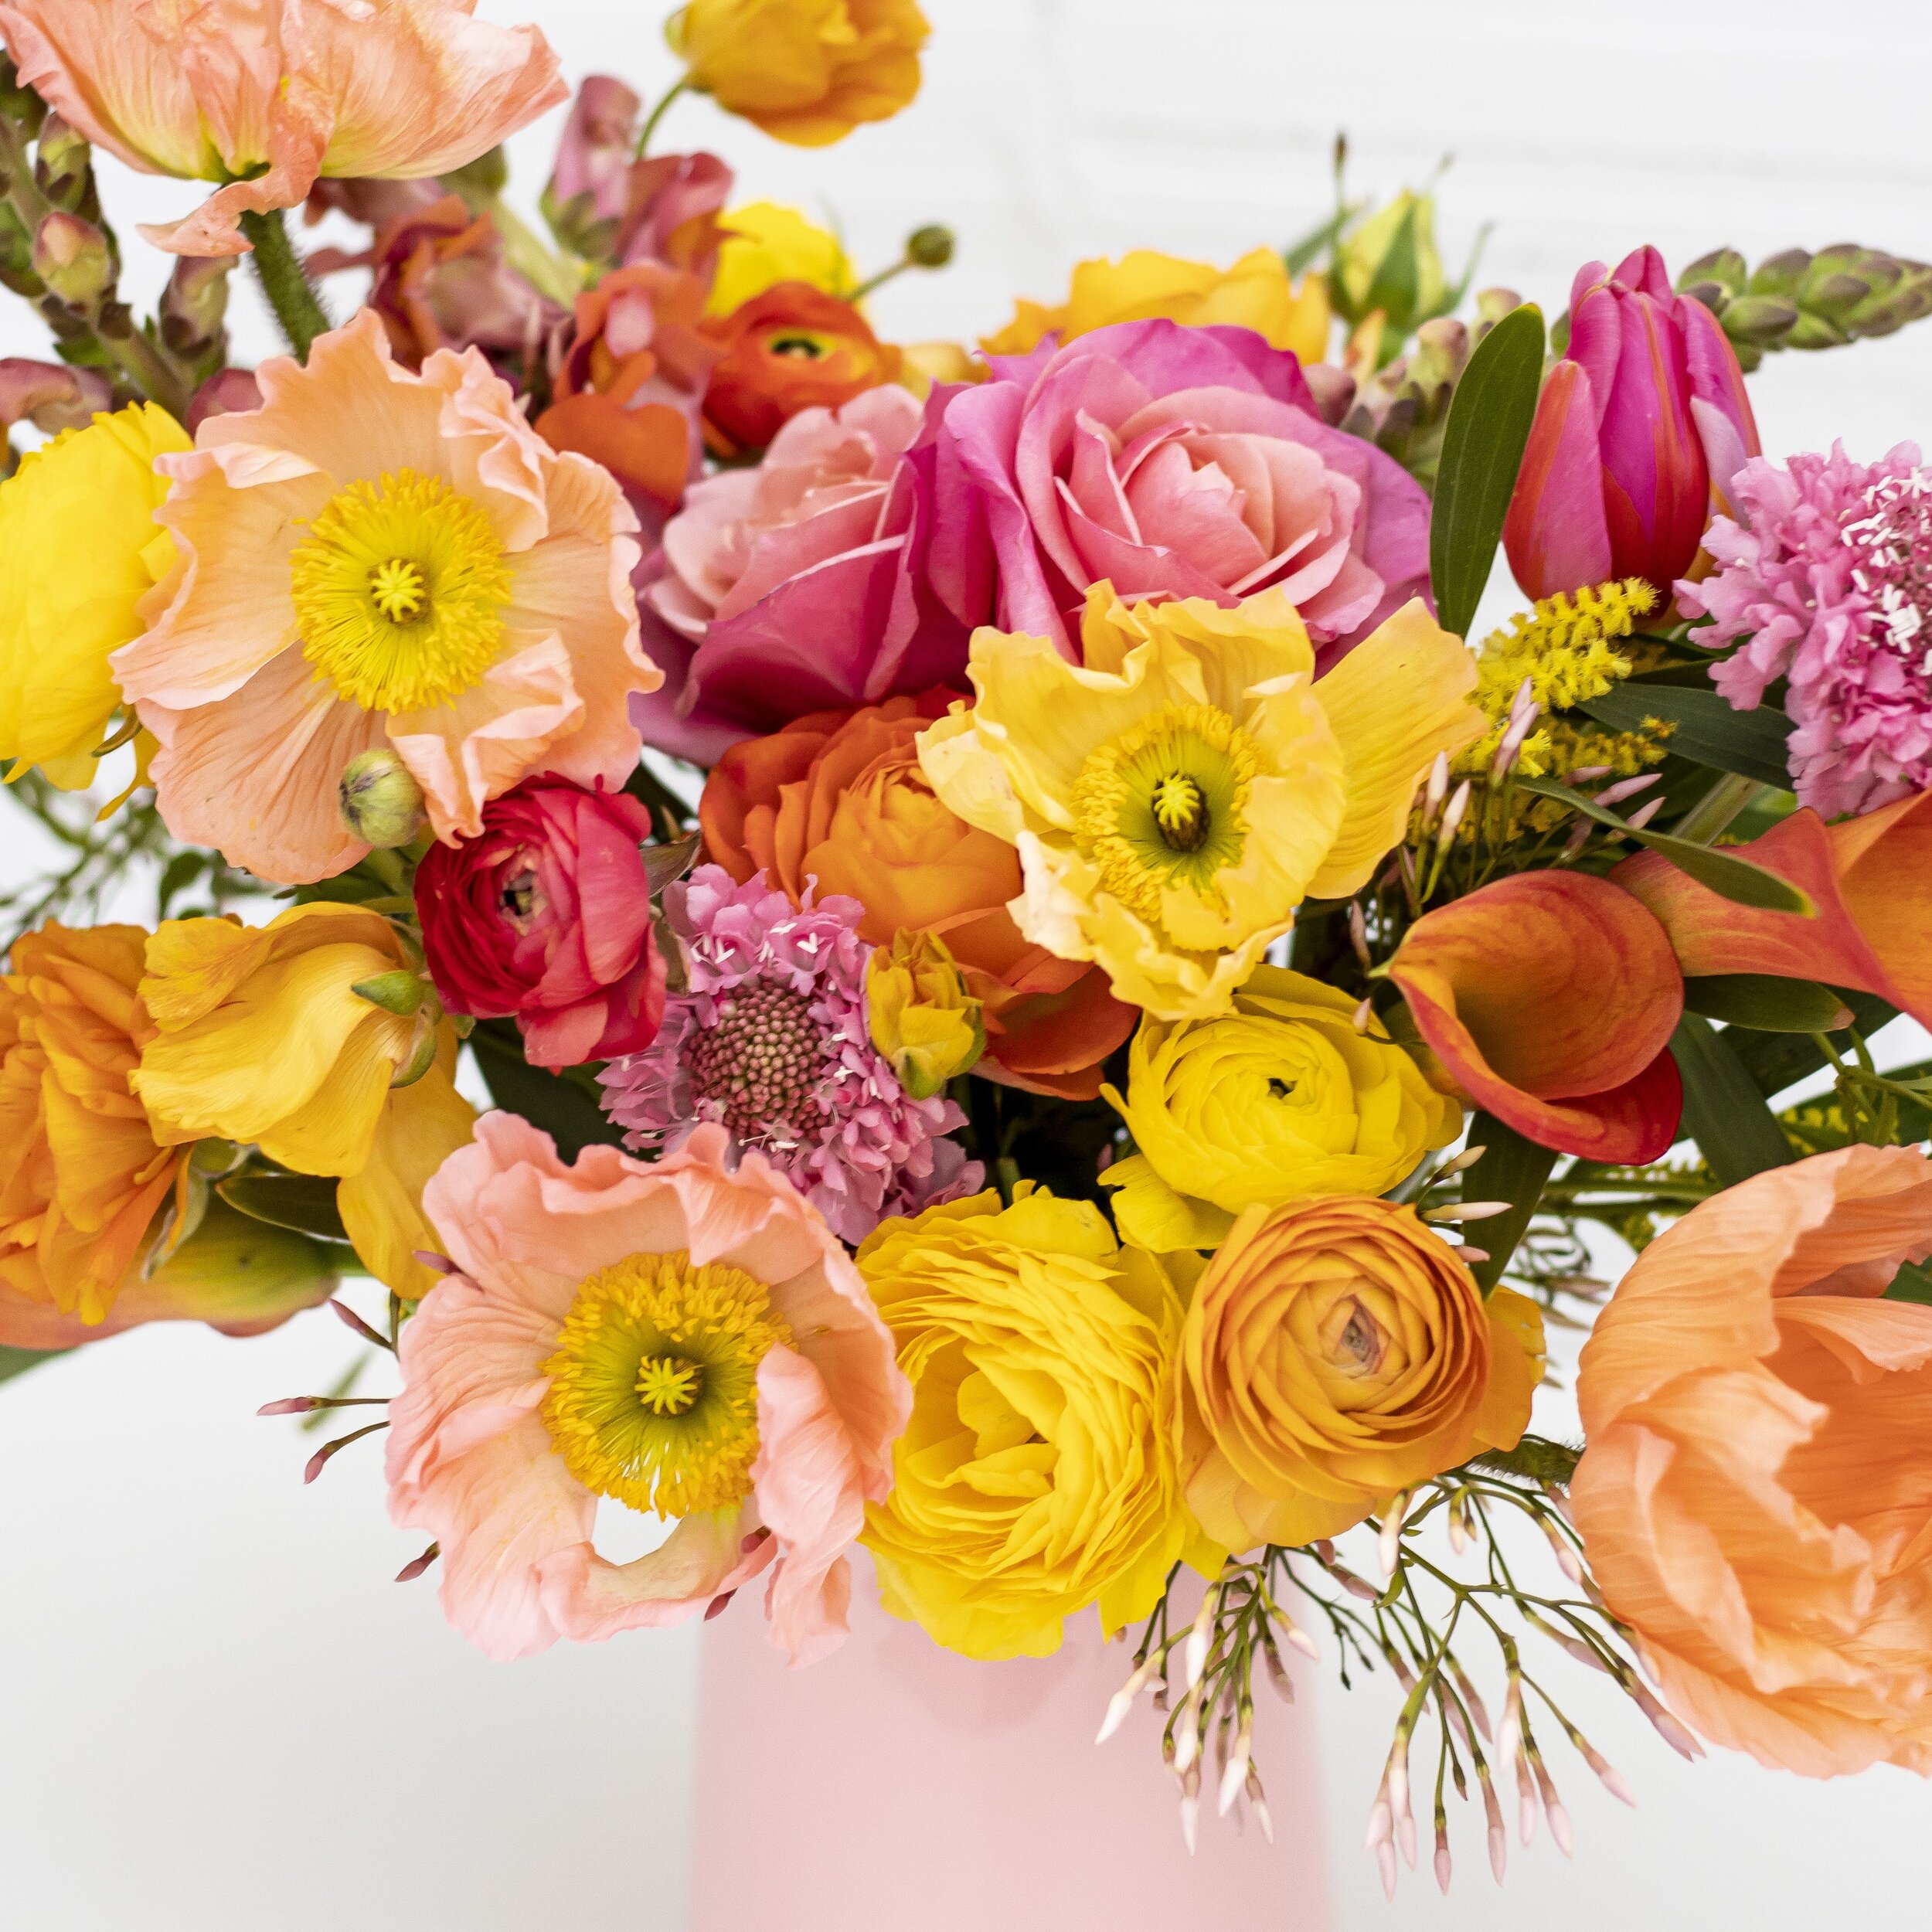 A close up of yellow flowers, pink flowers, and peach colored flowers sitting on a table top in a light pink vase.